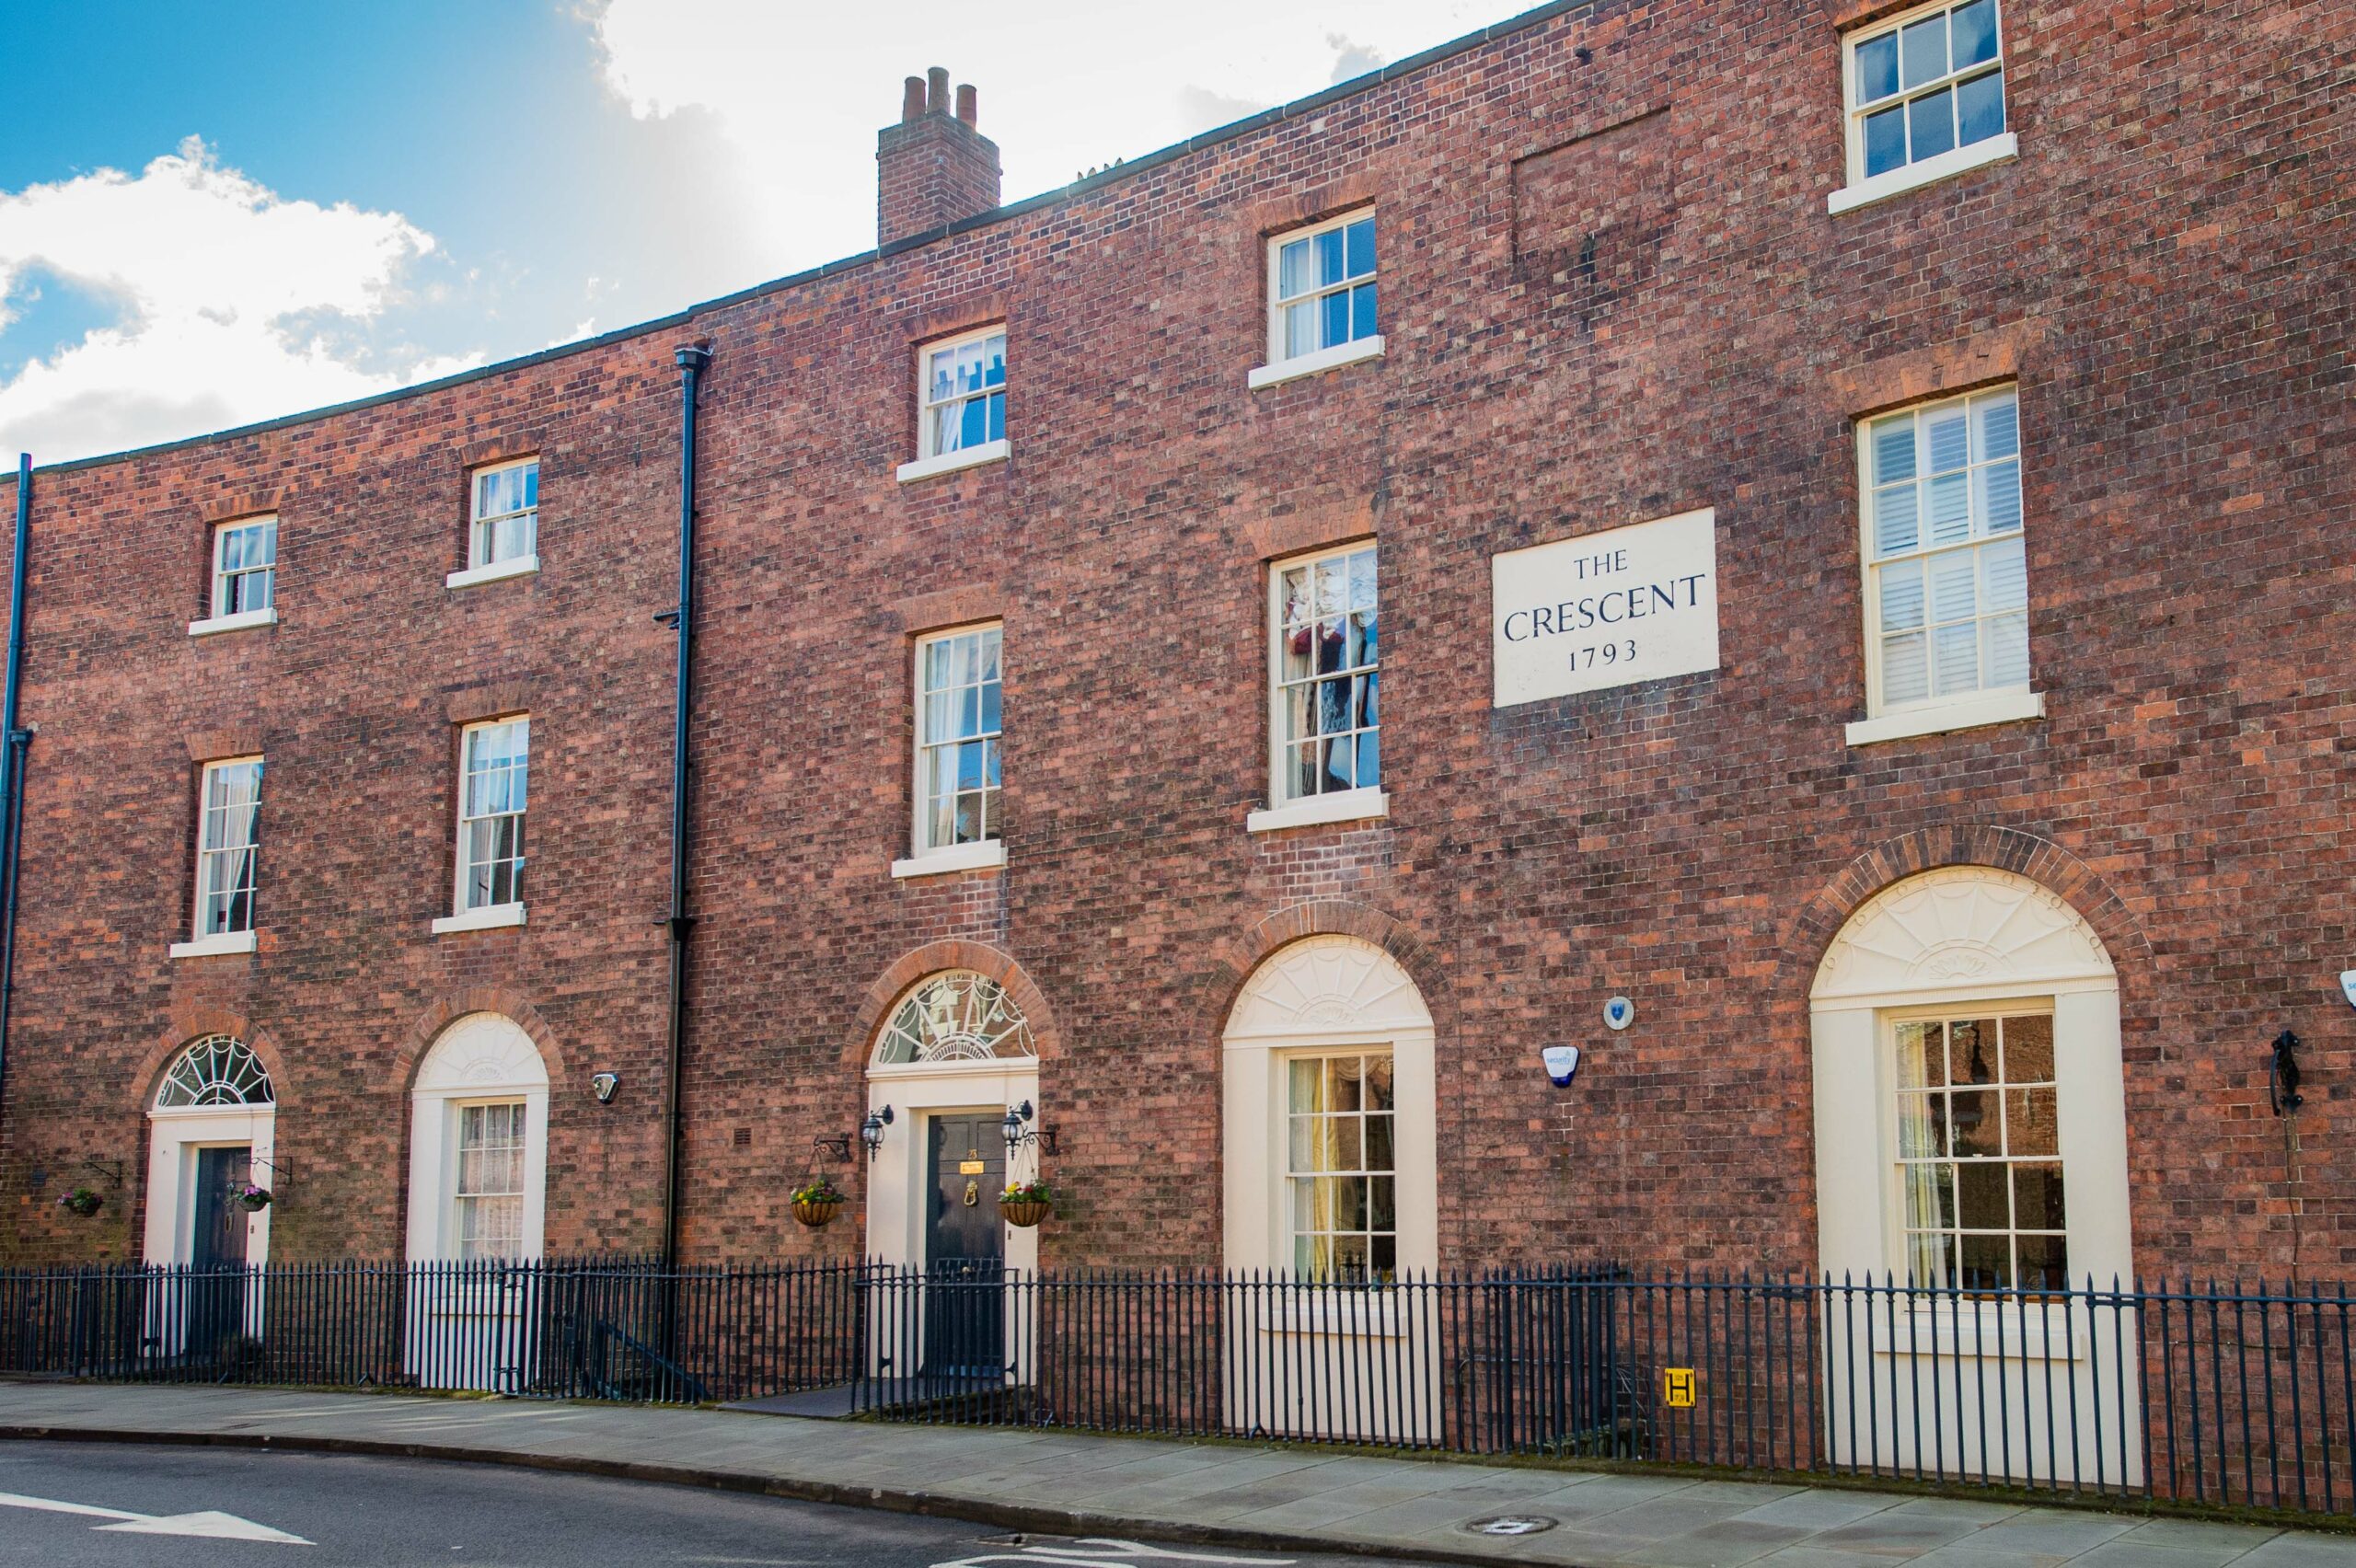 23 The Crescent  – Georgian town house which evokes a lasting sense of well-being